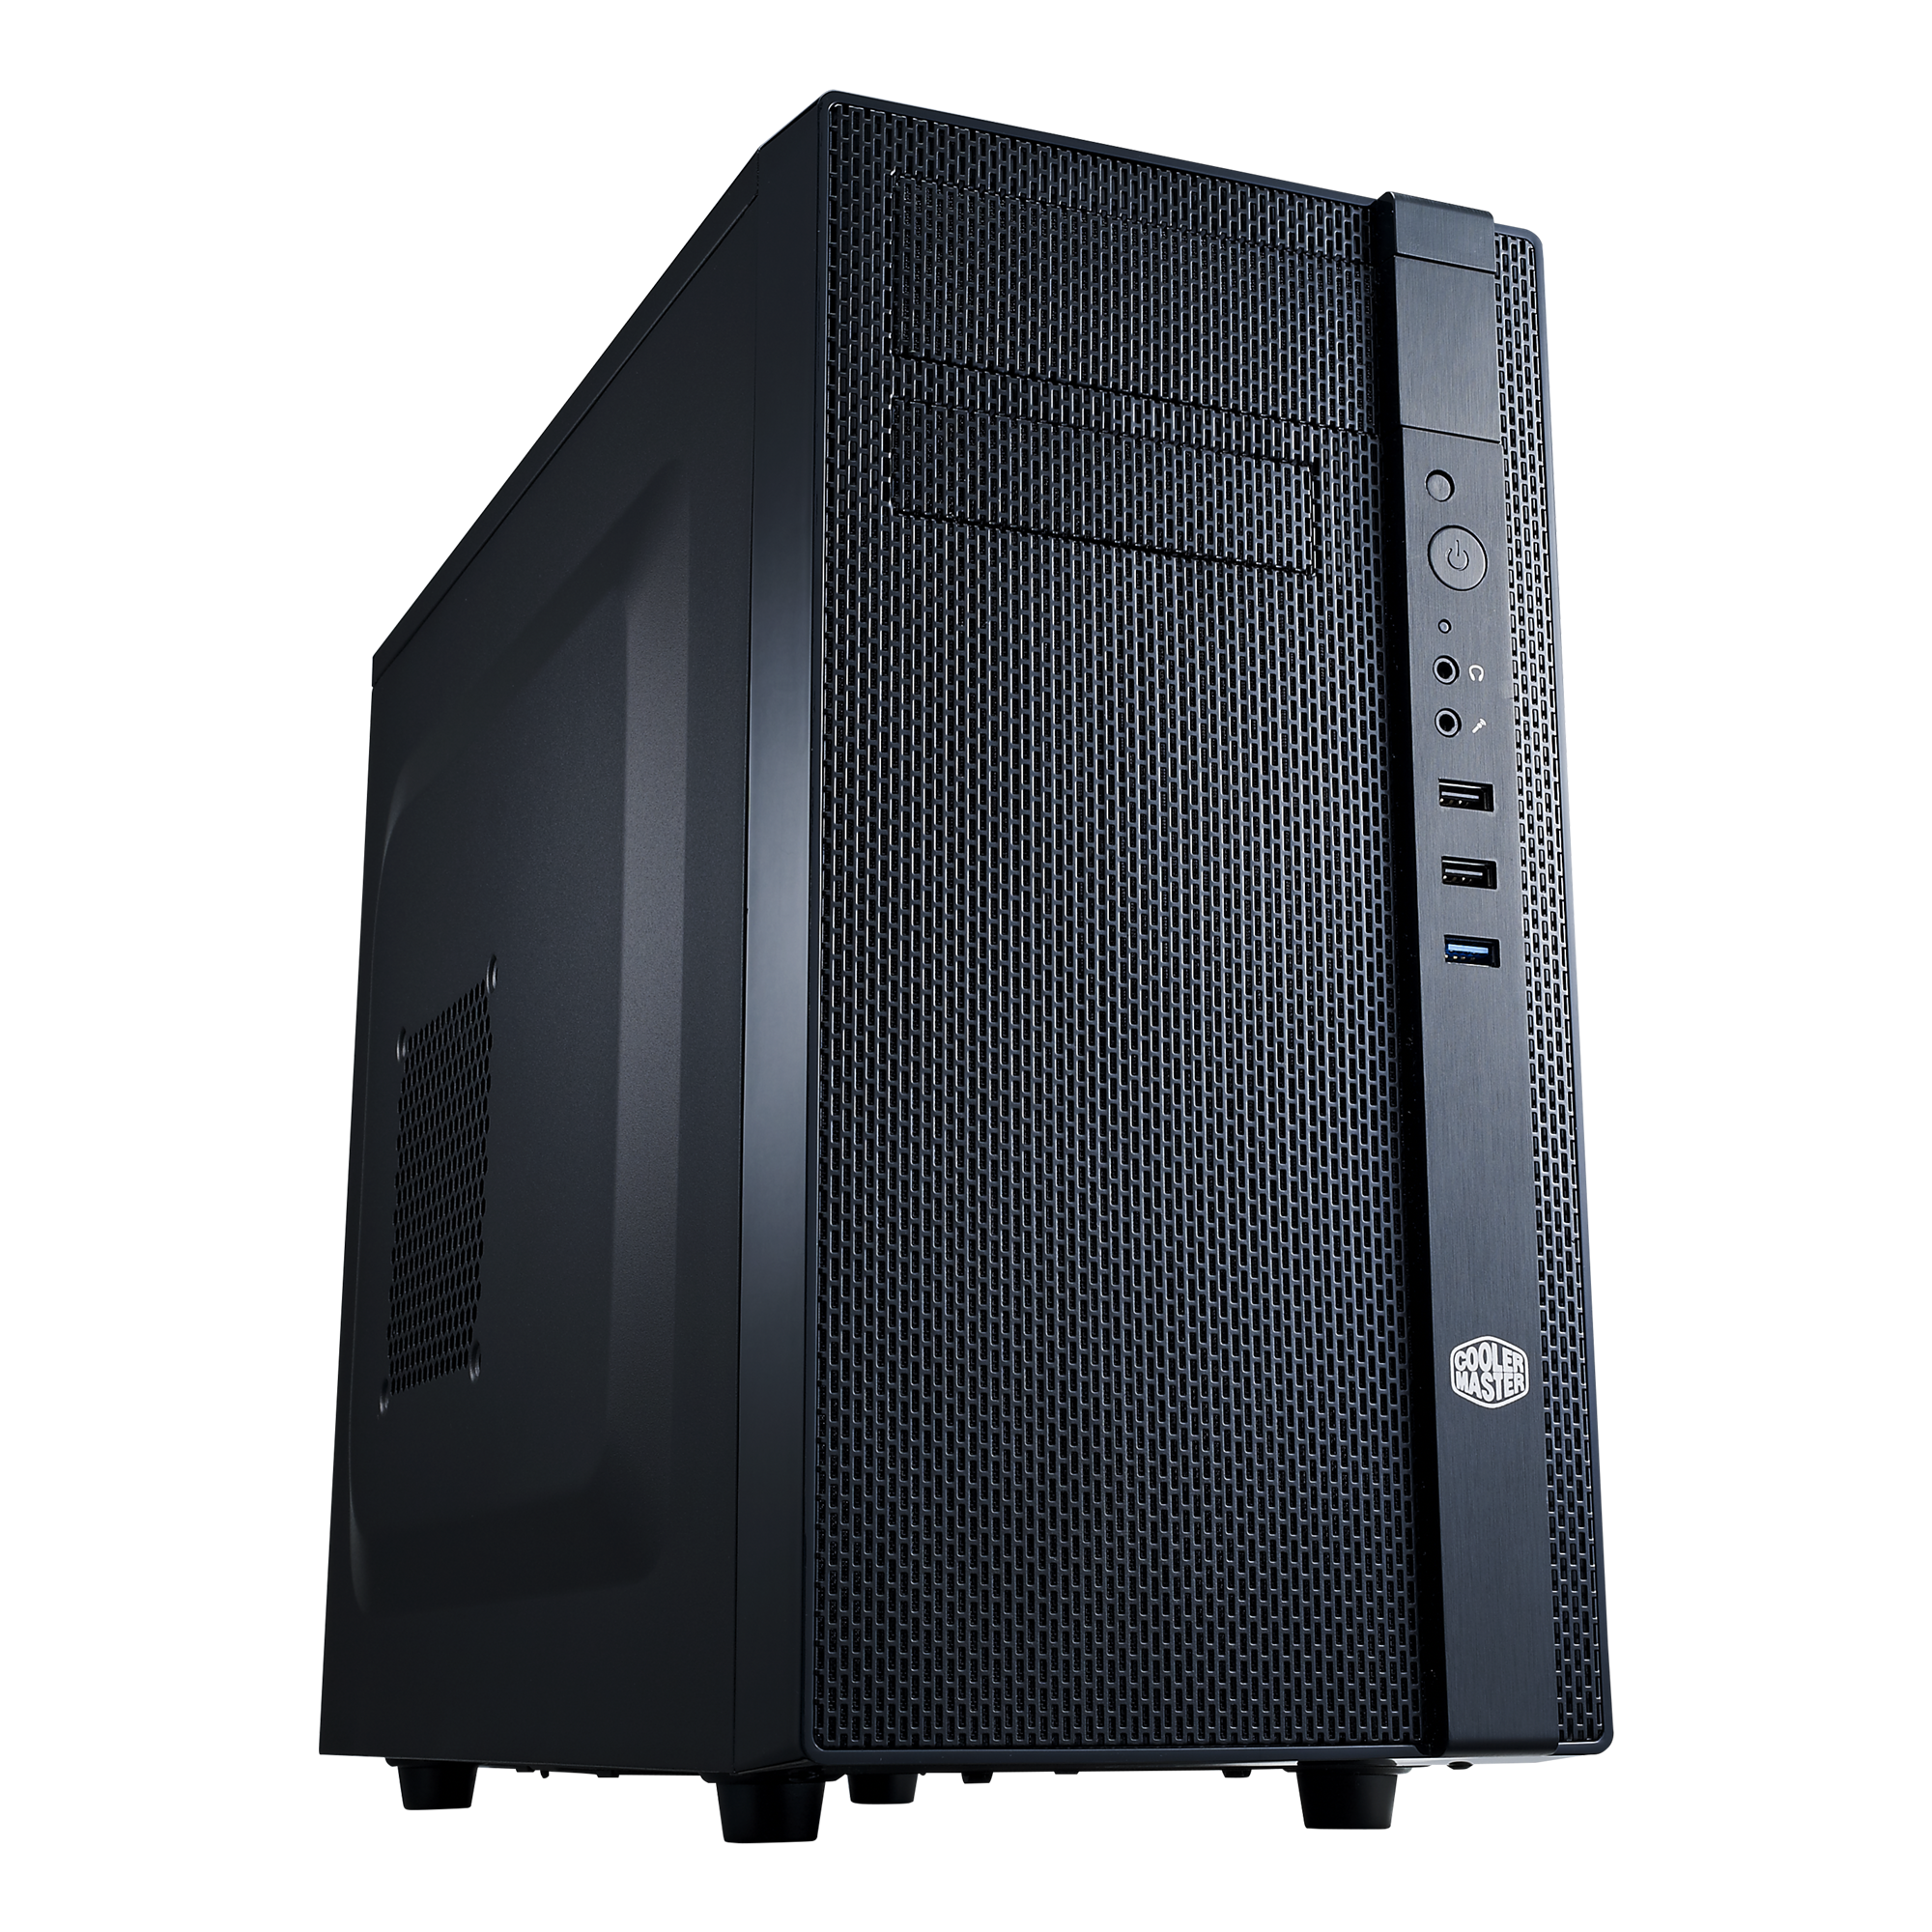 Cooler Master N200 Mini Tower Computer Case